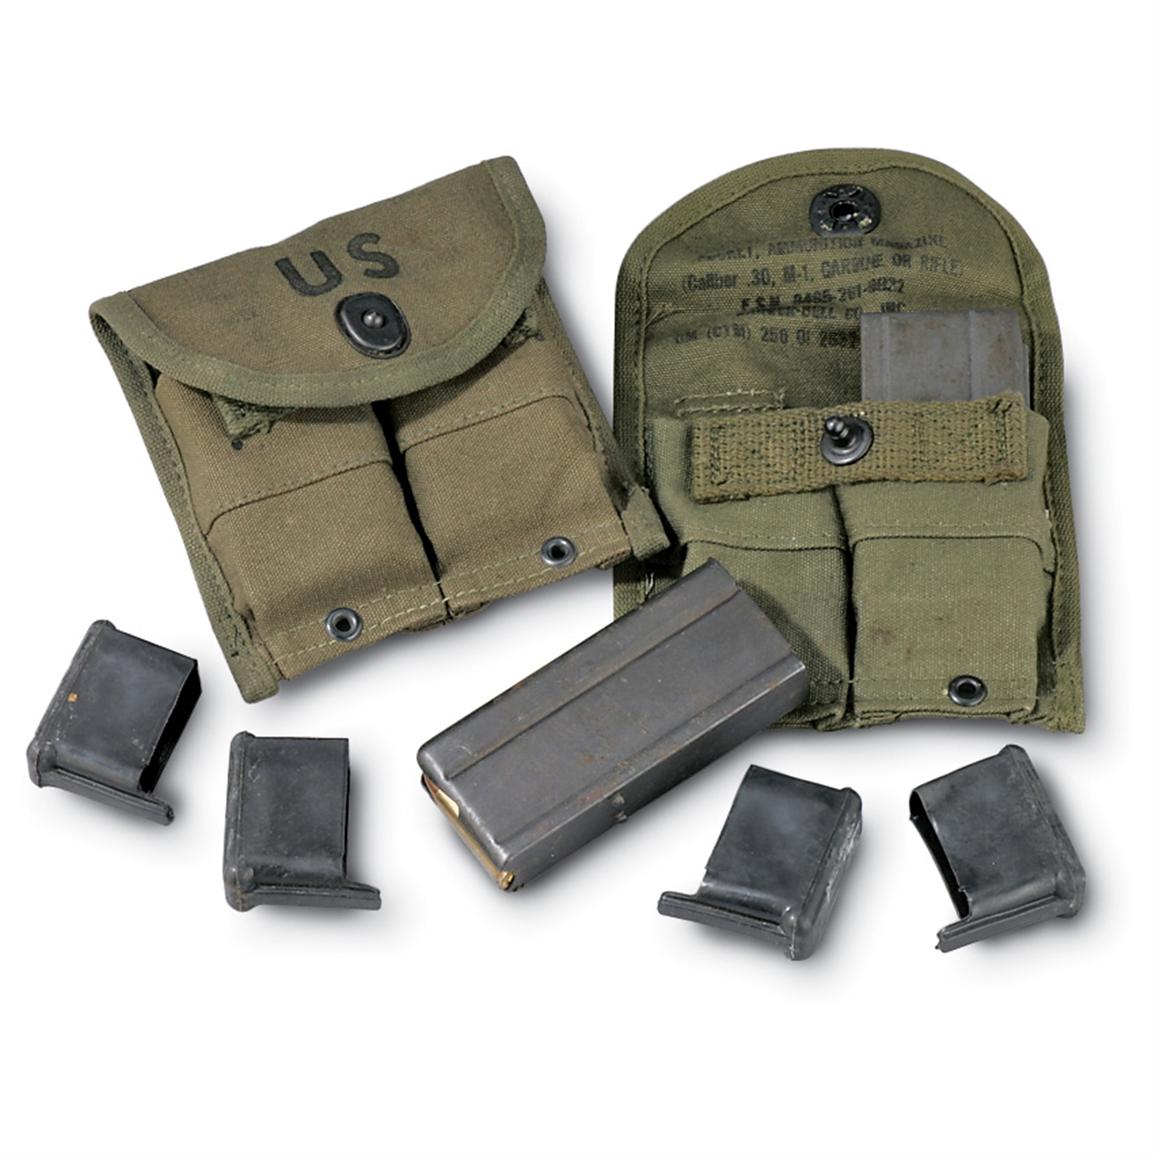 Us Gi M1 Carbine Mags Pouch Kit 102059 Shooting Accessories At